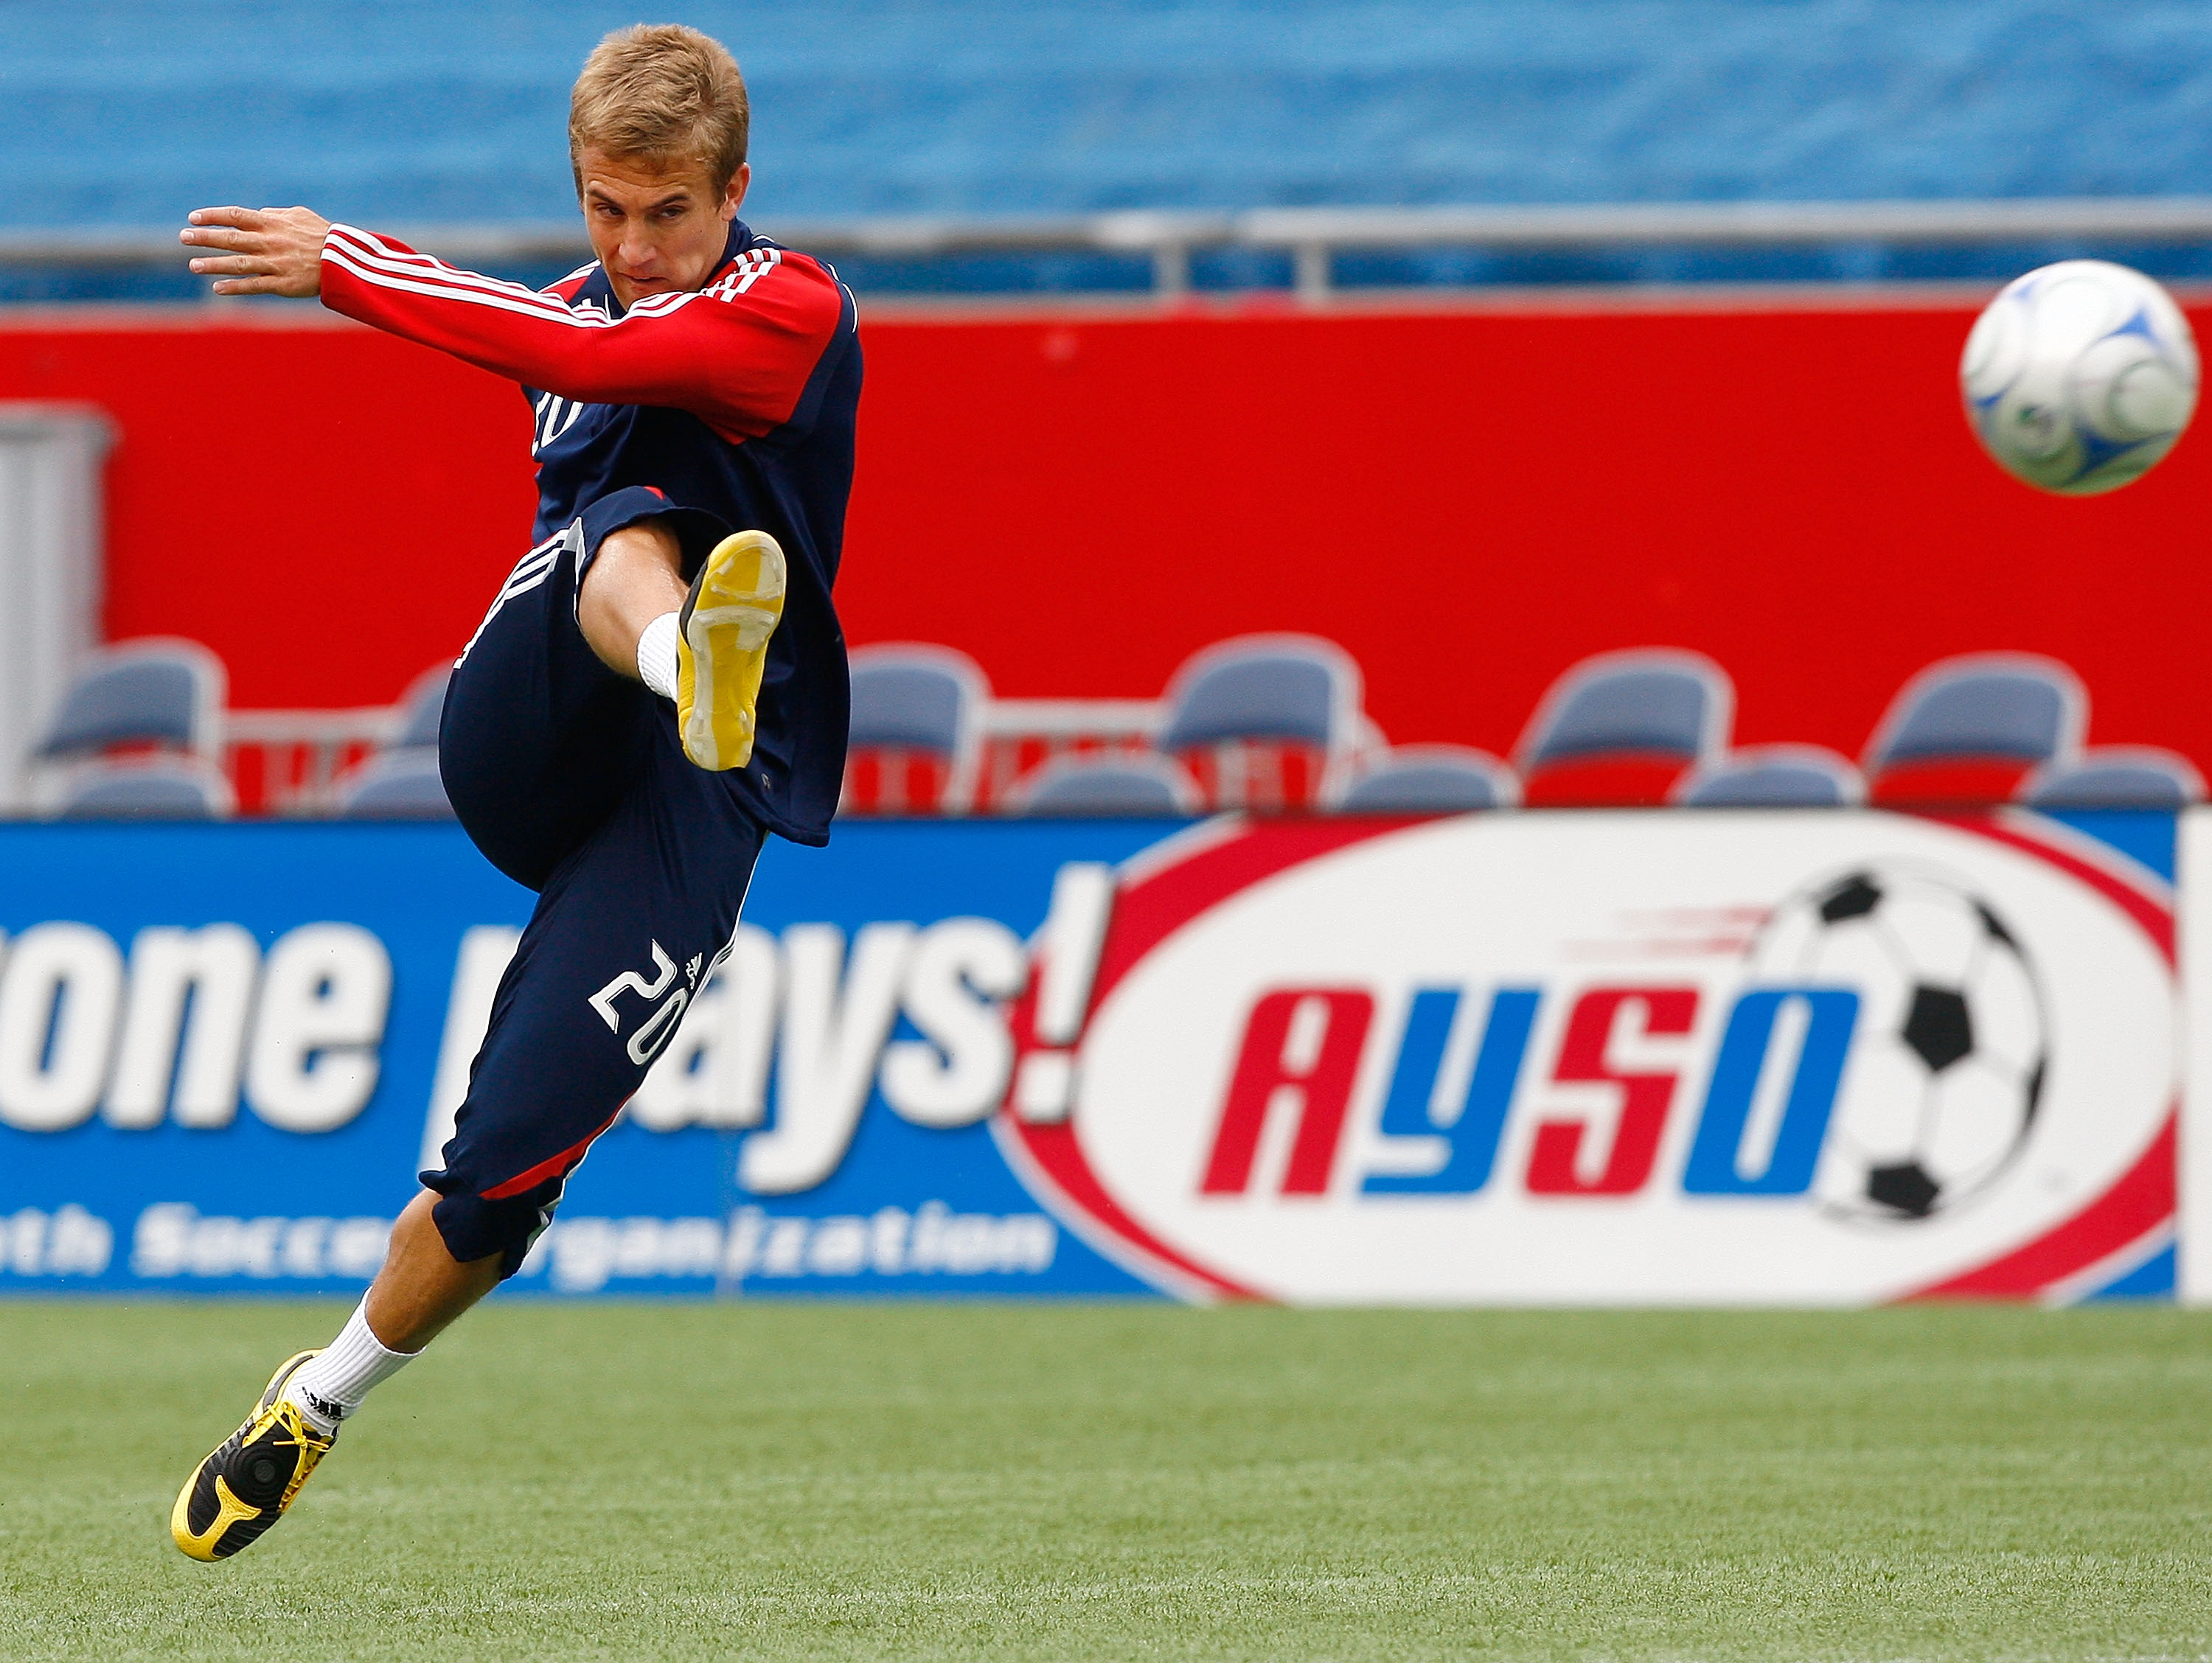 FOXBOROUGH, MA - MAY 3: Taylor Twellman #20 of the New England Revolution practices a shot  before a game against the Houston Dynamo at Gillette Stadium on May 3, 2009 in Foxborough, Massachusetts.  (Photo by Jim Rogash/Getty Images)